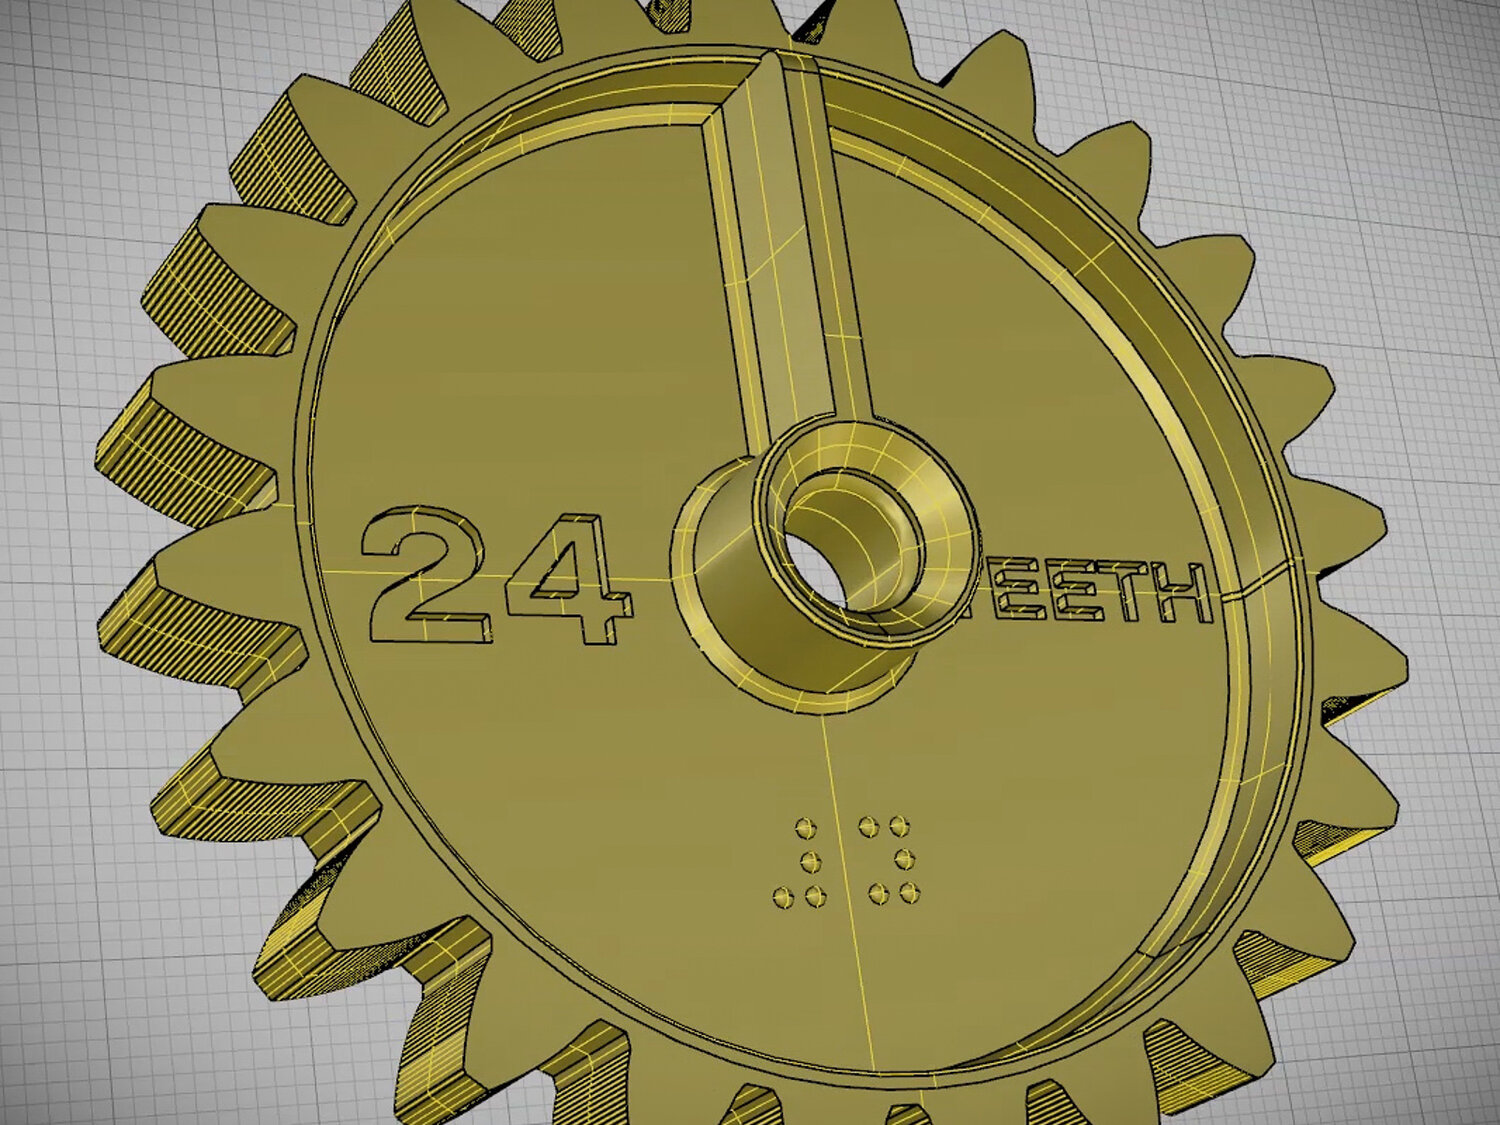 Math Gear(s) 3D Printable Learning Aid - FREE DOWNLOAD! — Works By Solo